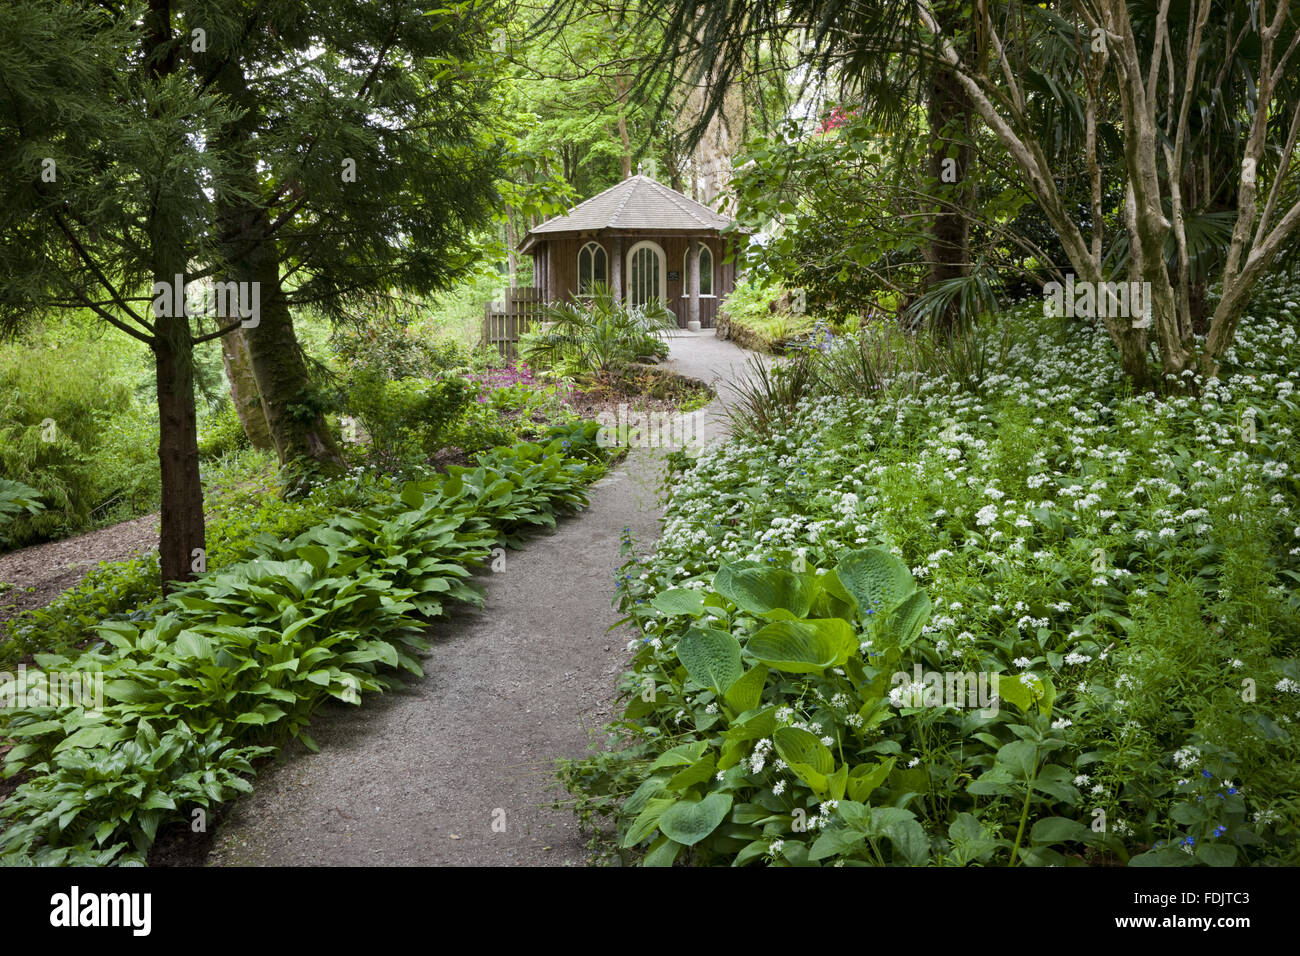 The new entrance and landscaping at Trelissick Garden, Cornwall, in May. Stock Photo